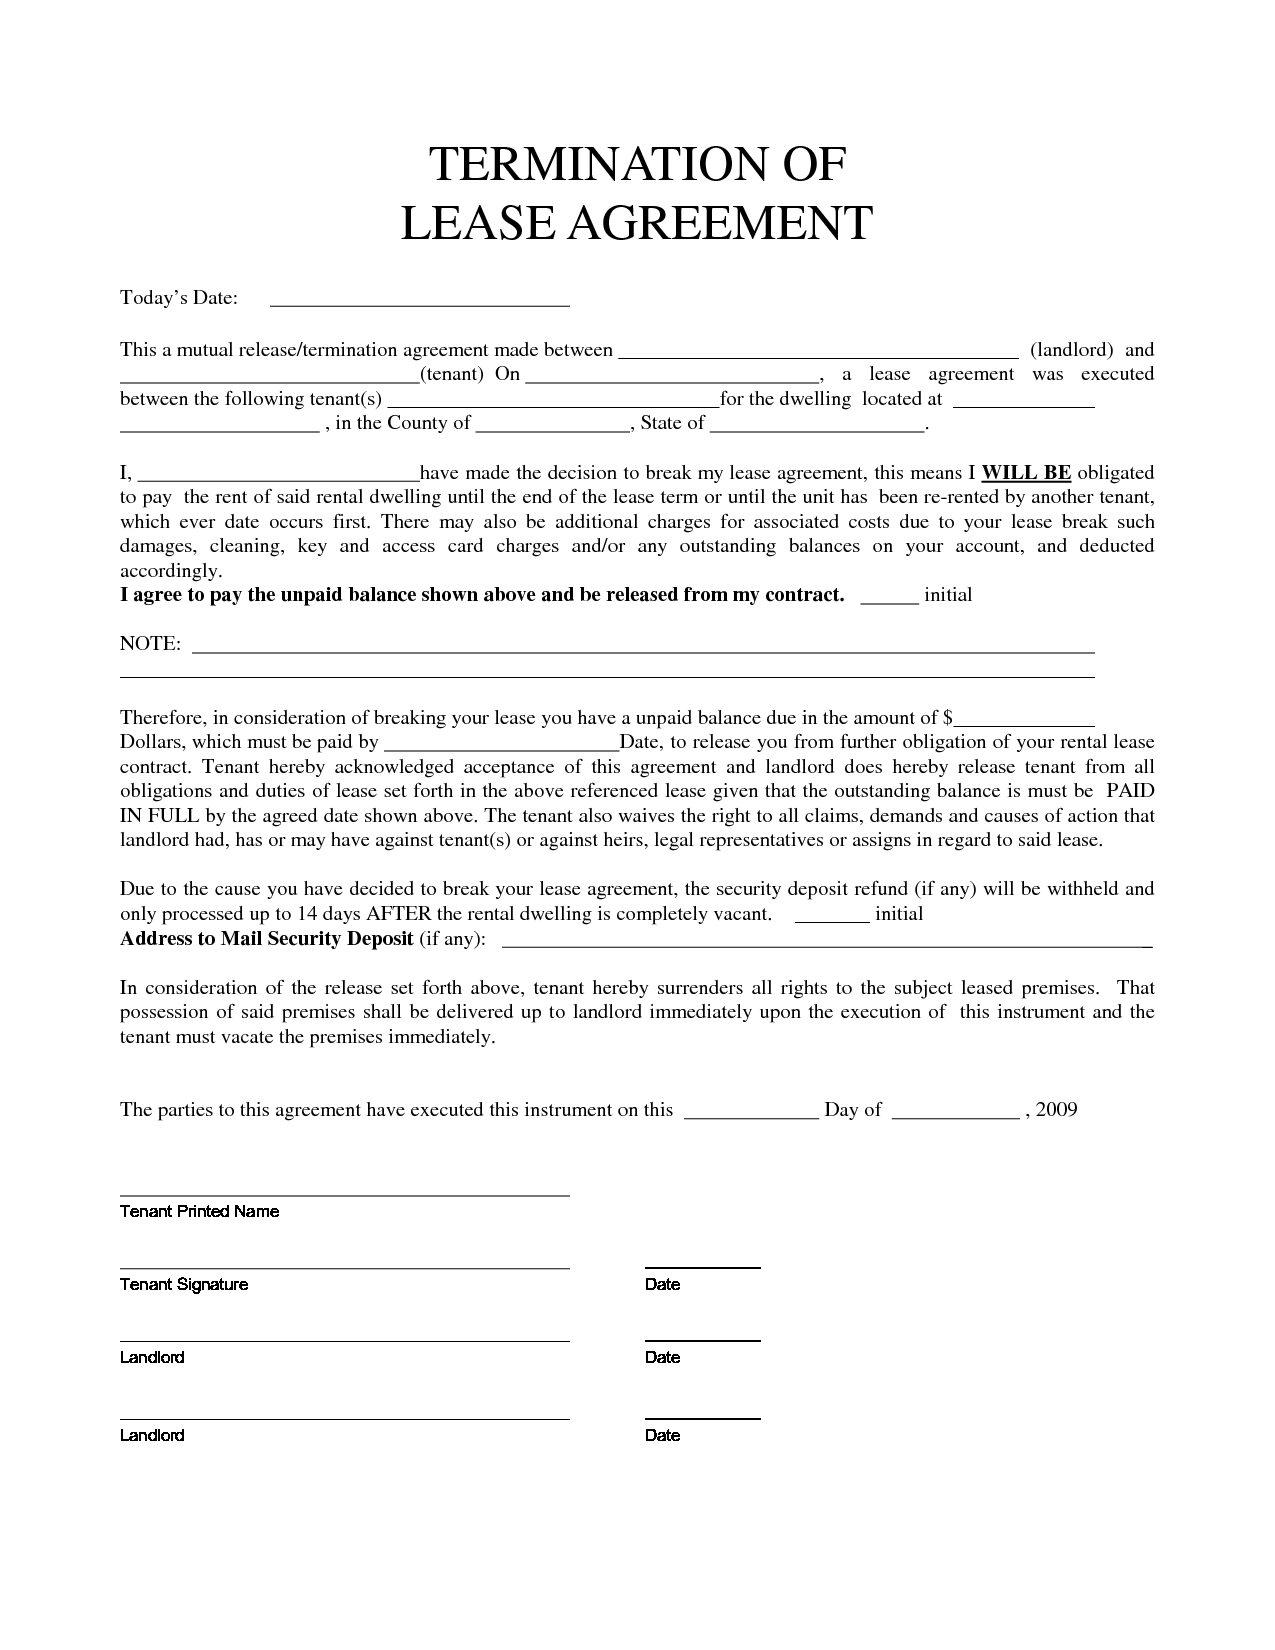 best photos of lease agreement early release clause notice to 